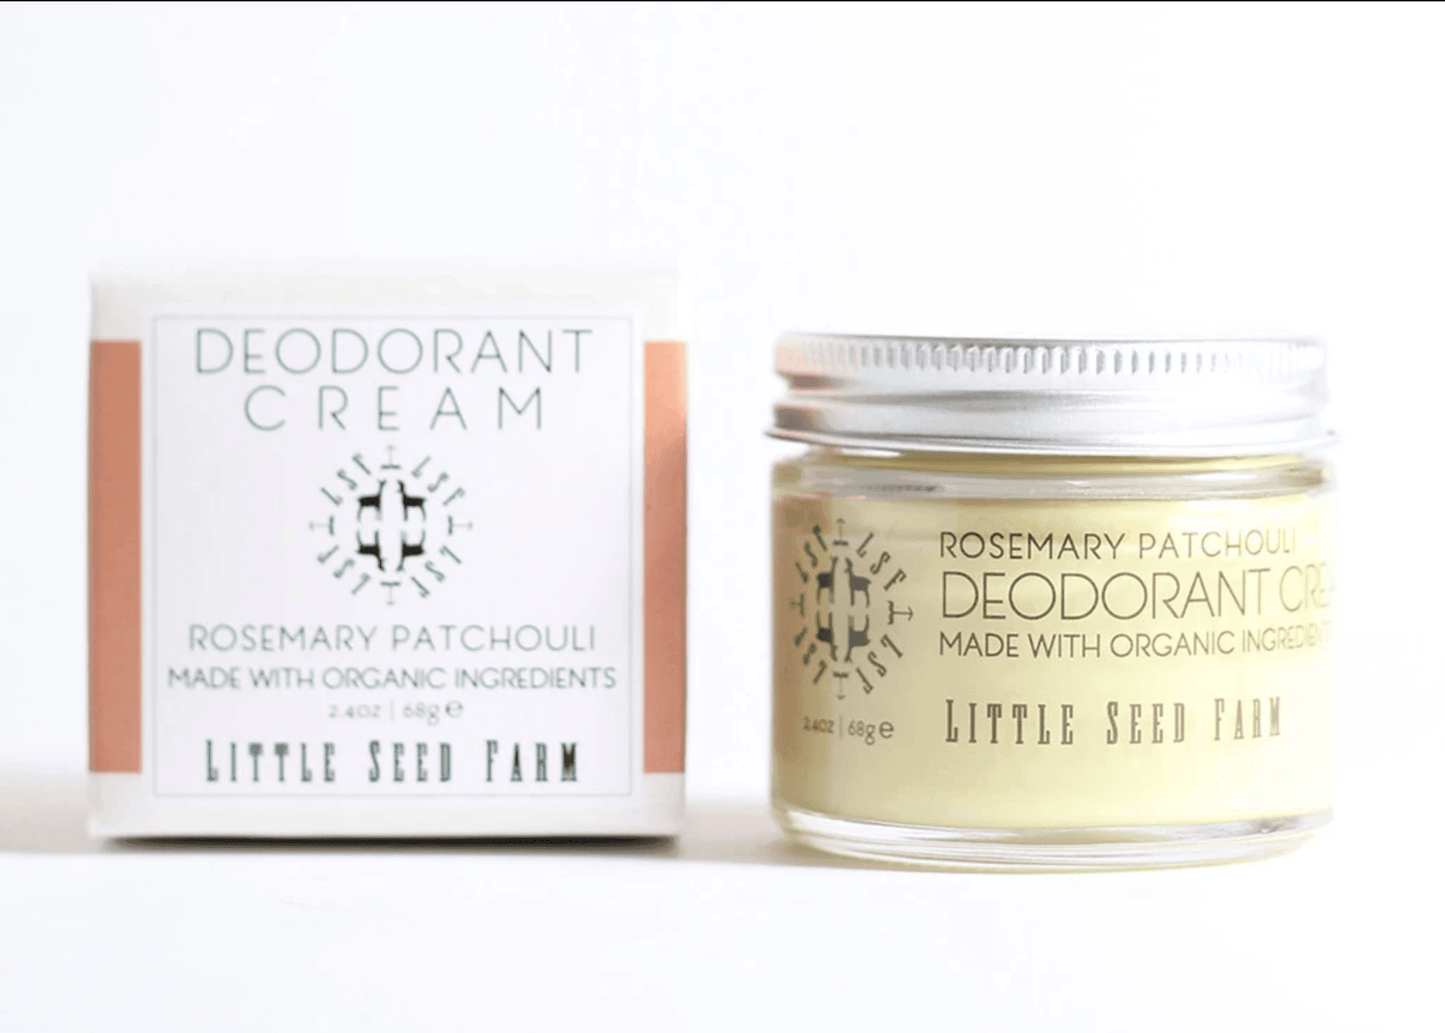 All Natural Deodorant Cream - Rosemary Patchouli - Little Seed Farm -Freehand Market